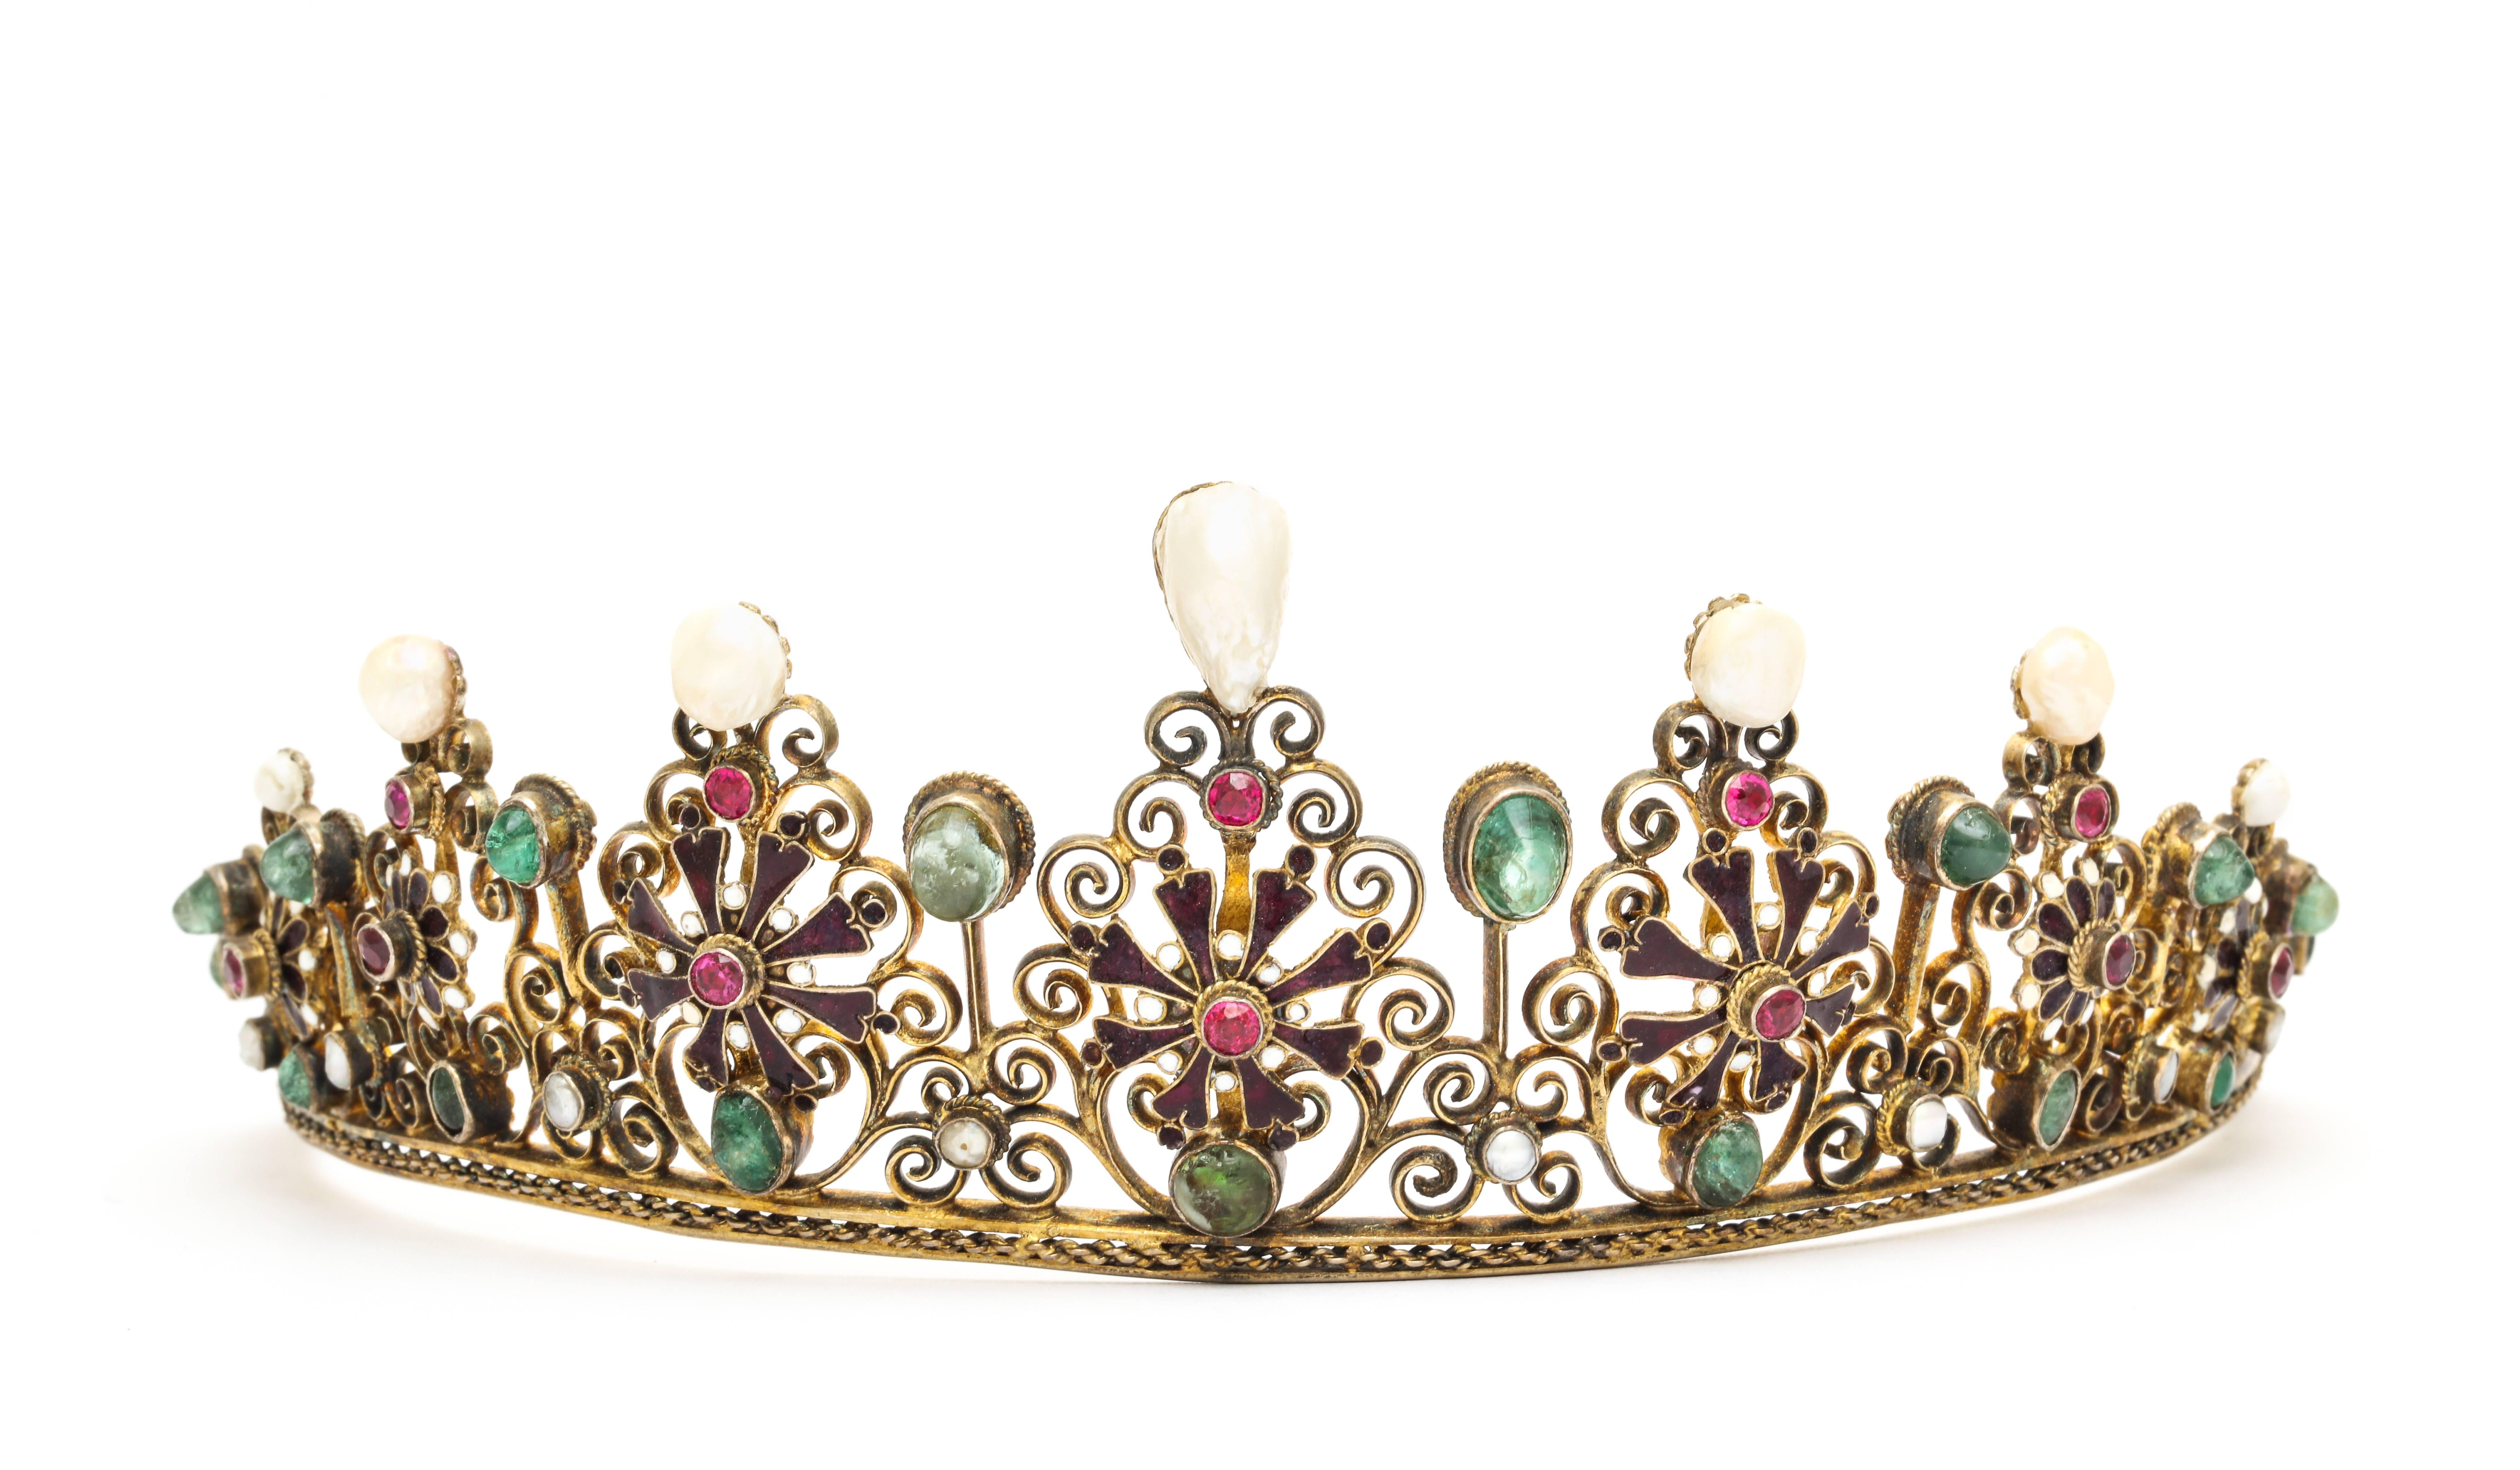 Circa 1860 Austro-Hungarian gemstone tiara of gold gilt silver filigree with enamel details set with emeralds and rubies and highlighted with natural pearls.   in original leather travel case. Marked WM, 56.3 grams, 2 inches x 9 1/2 inches, one